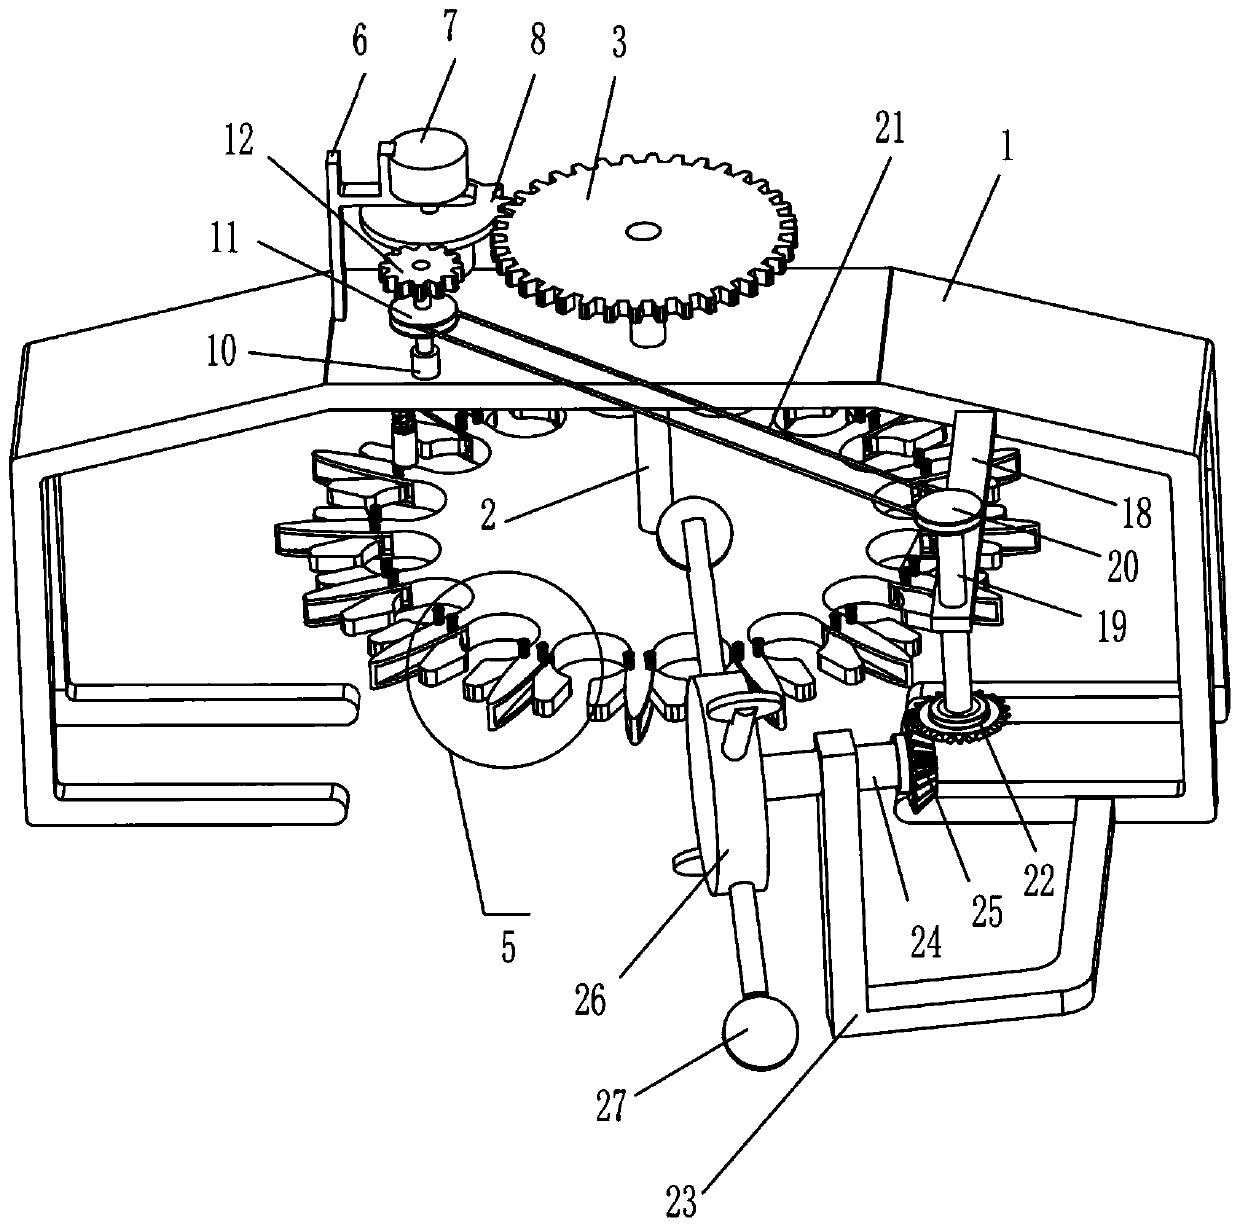 Bell pepper seed removing device